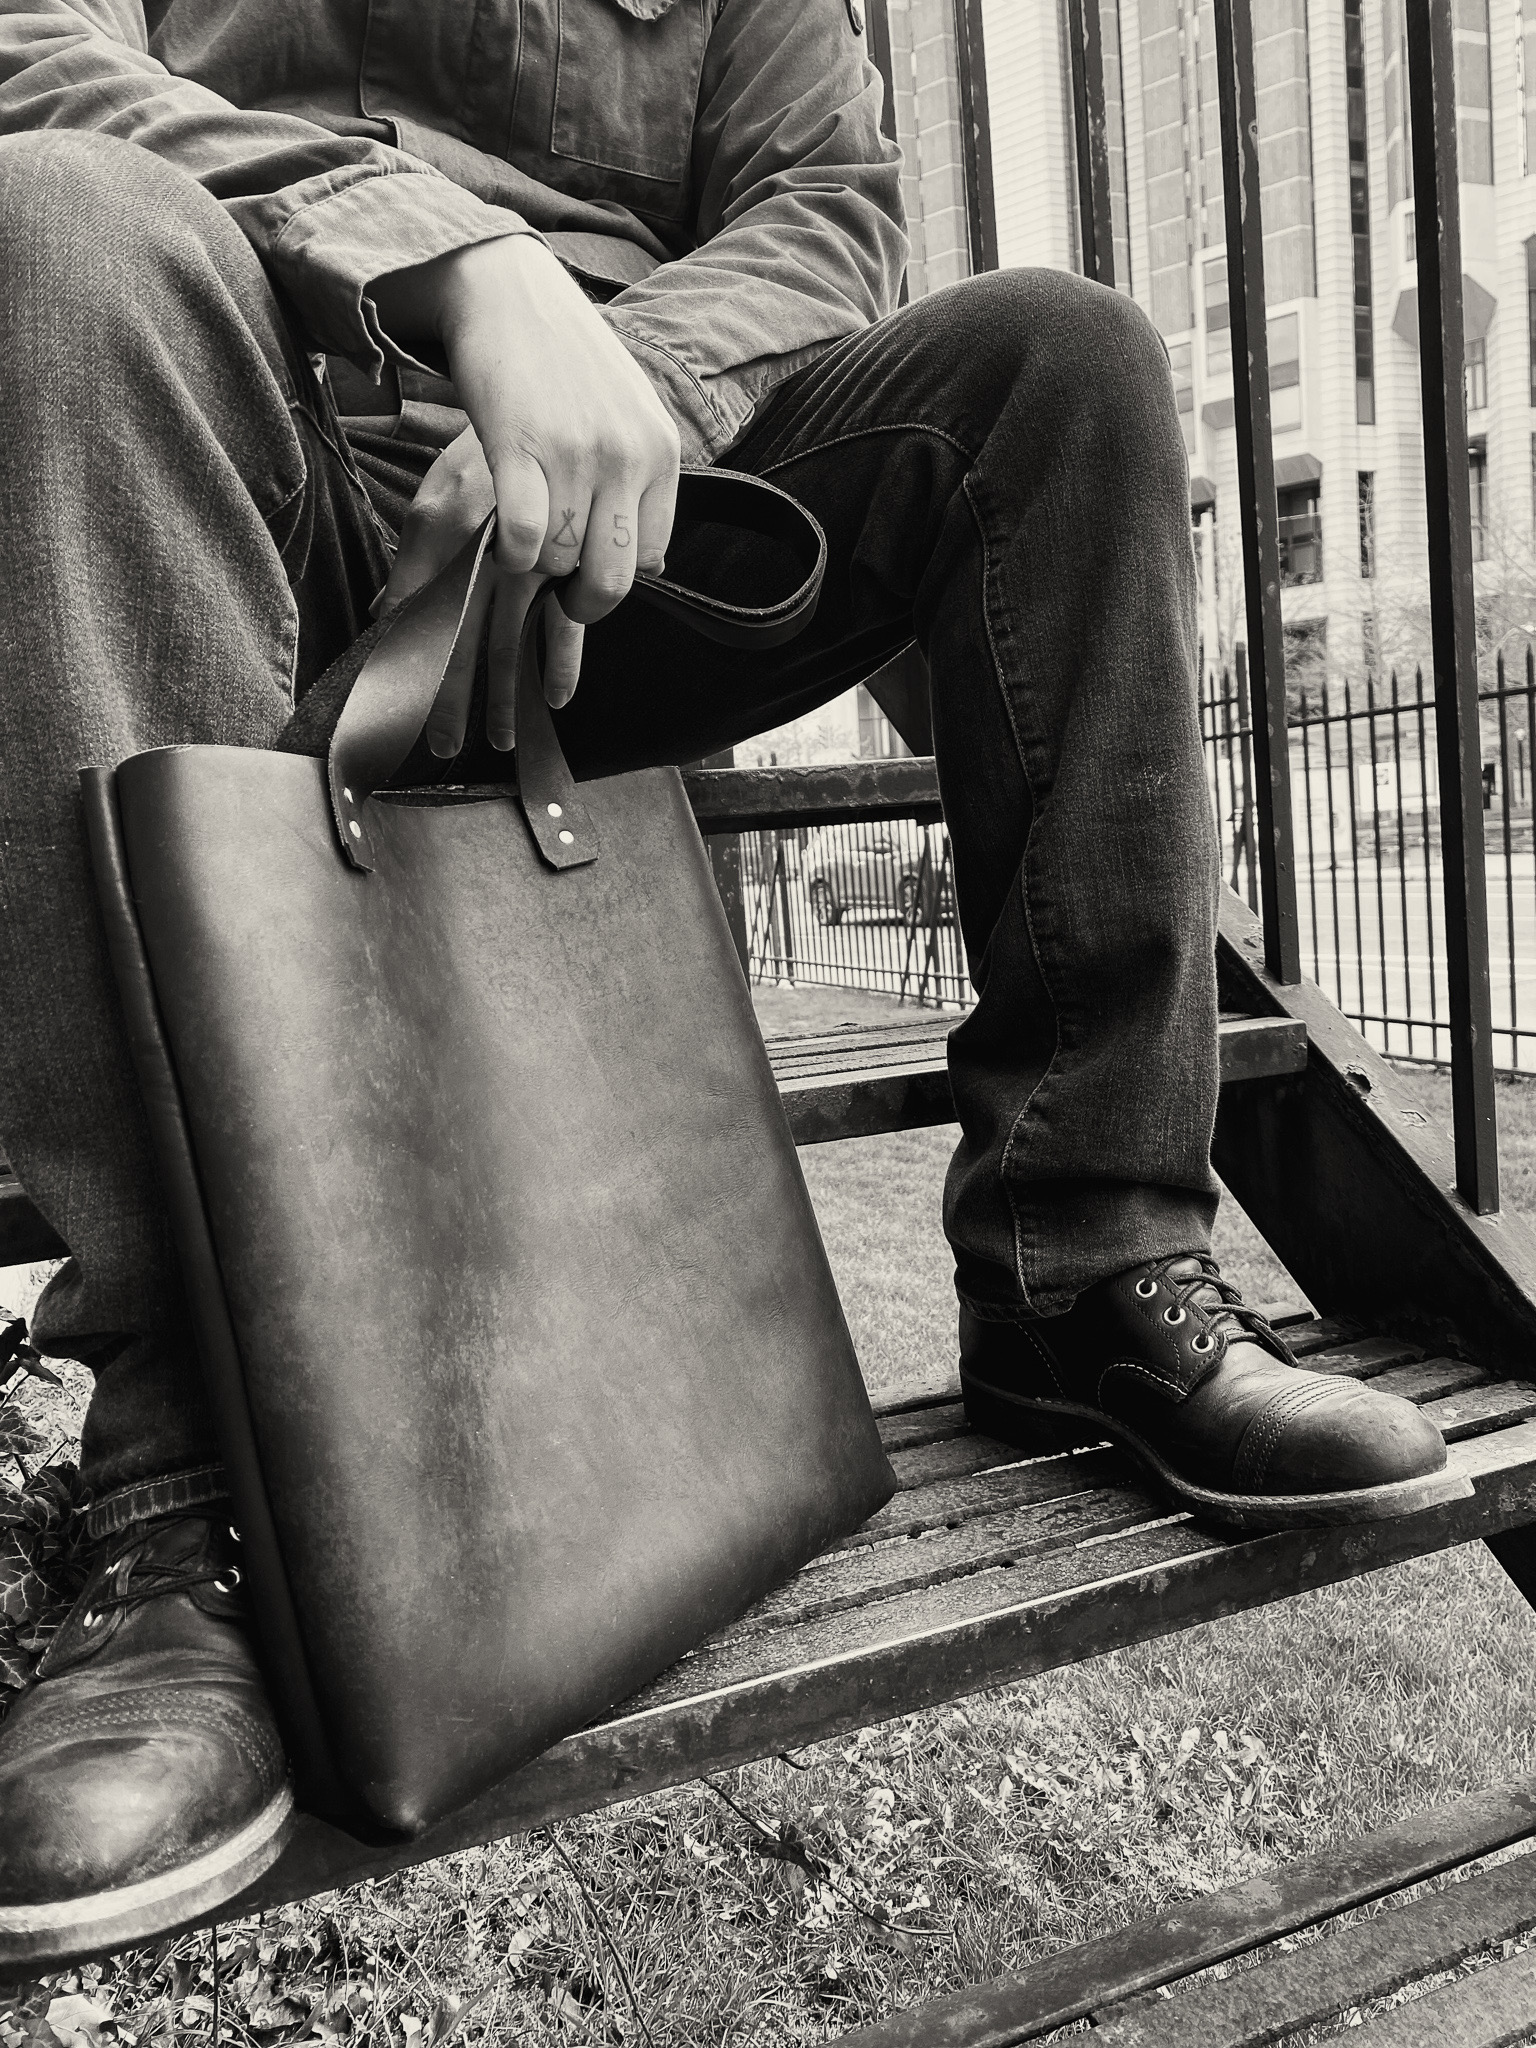 black and white photo of a leather bag